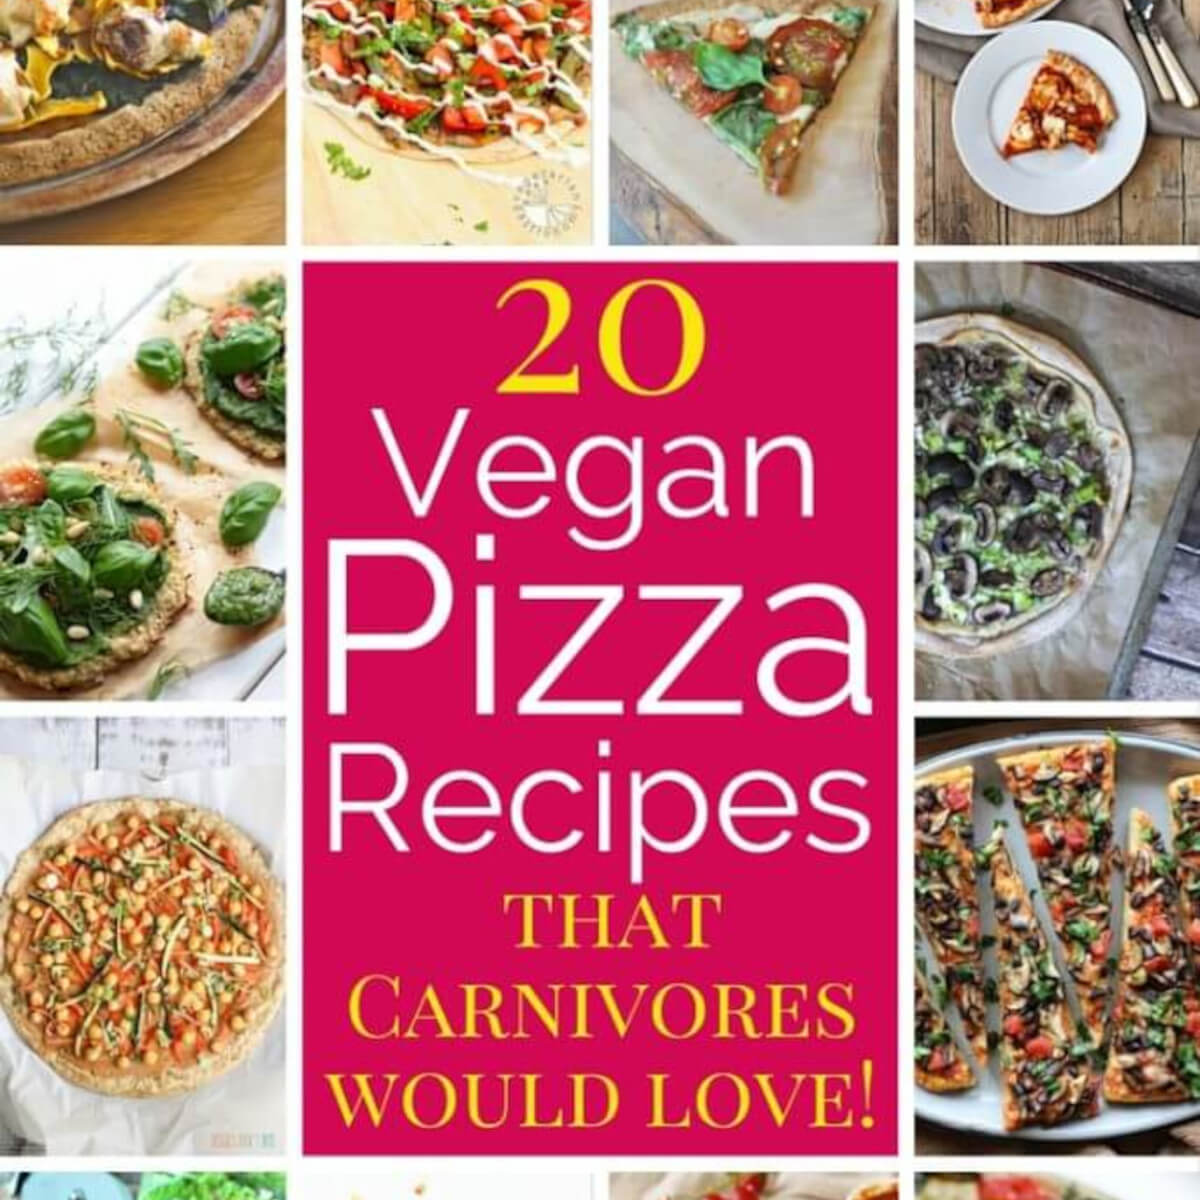 20 Vegan Pizza Recipes that carnivores meat lovers will love - Vegan Family Recipes Gluten-free